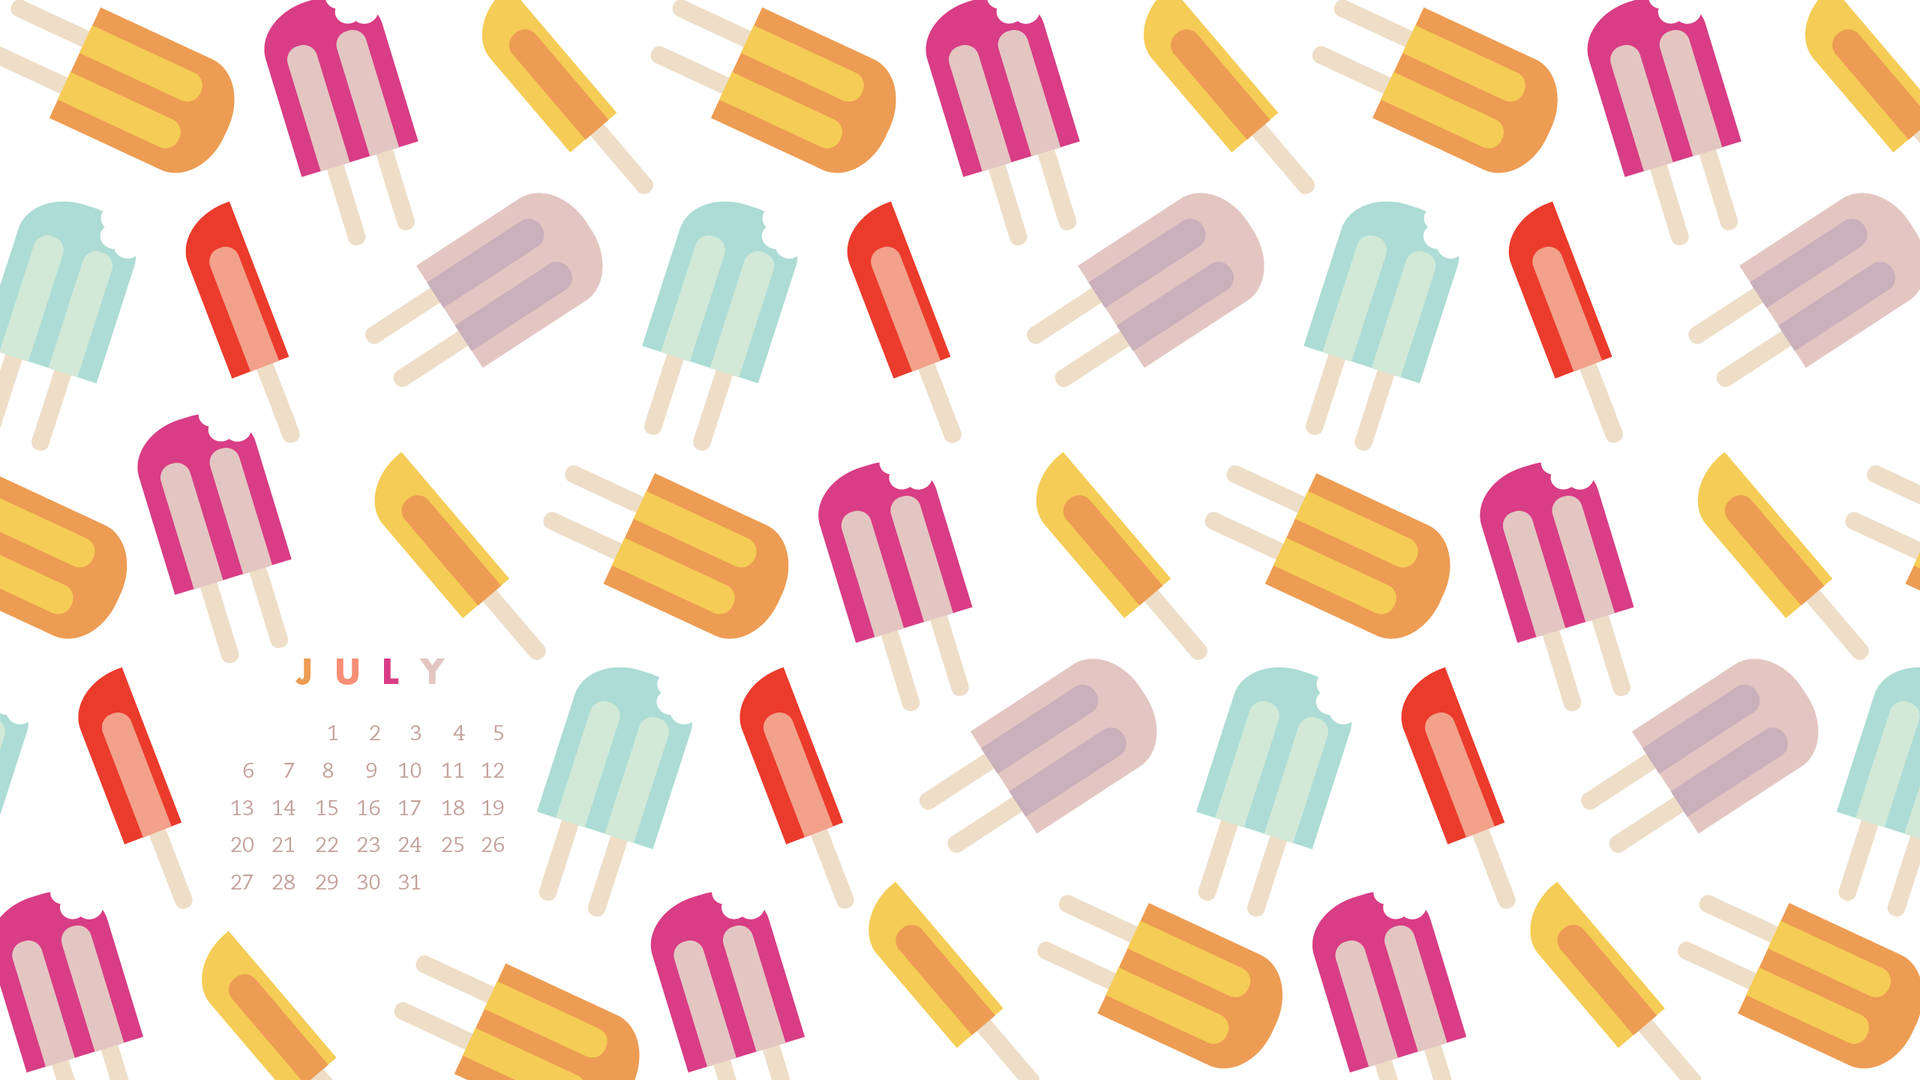 Cool Off With A Popsicle This July